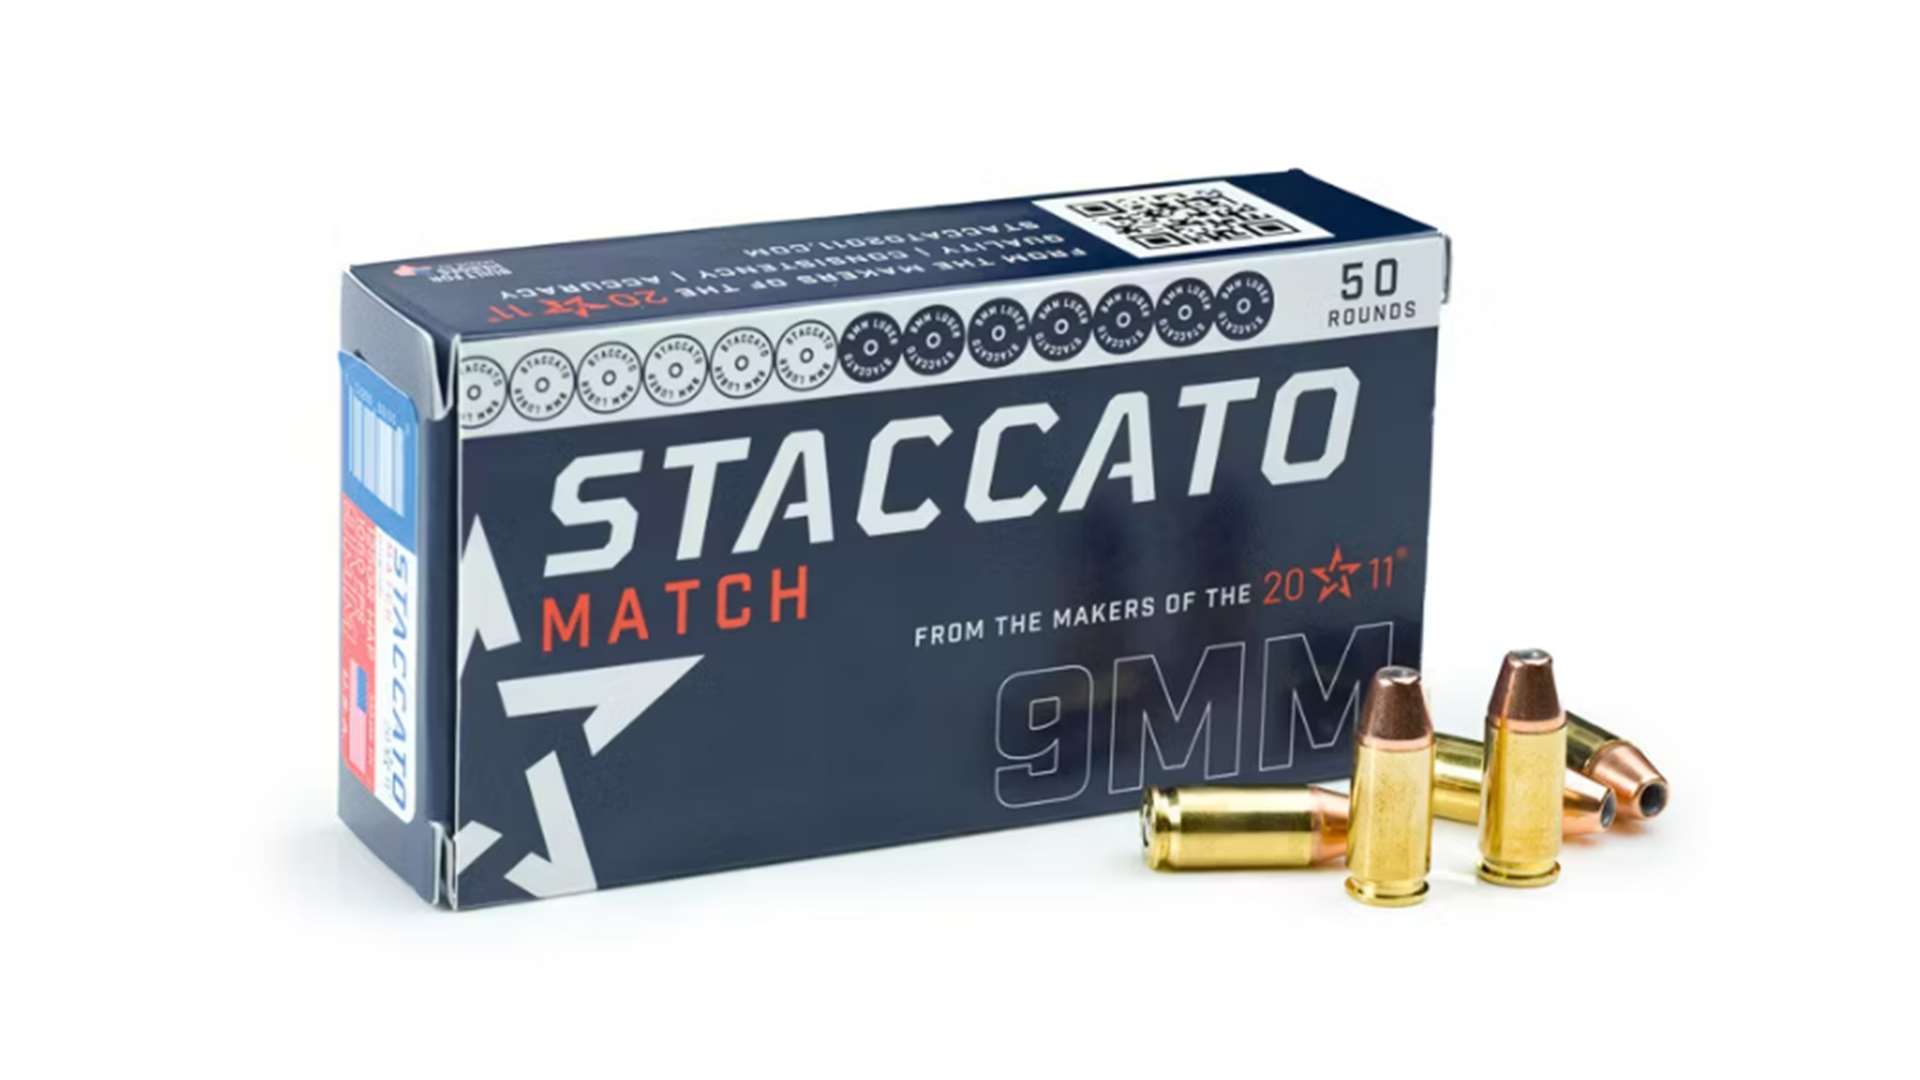 Staccato 9 mm Match